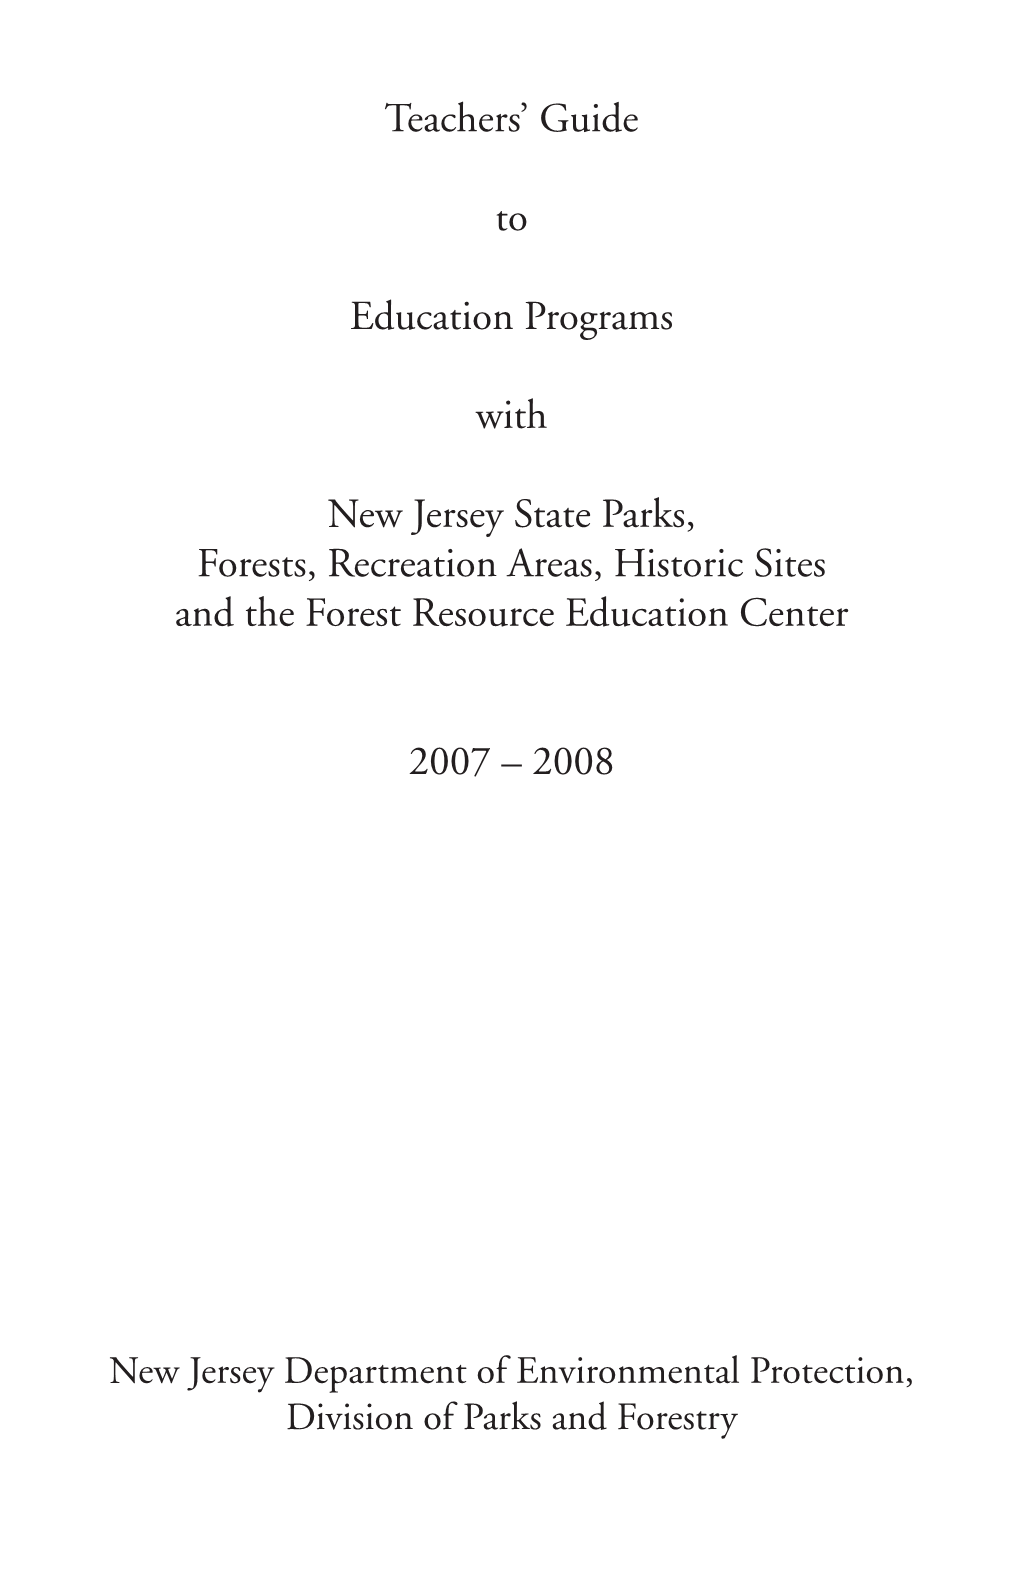 Teachers' Guide to Education Programs with New Jersey State Parks, Forests, Recreation Areas, Historic Sites and the Forest Re